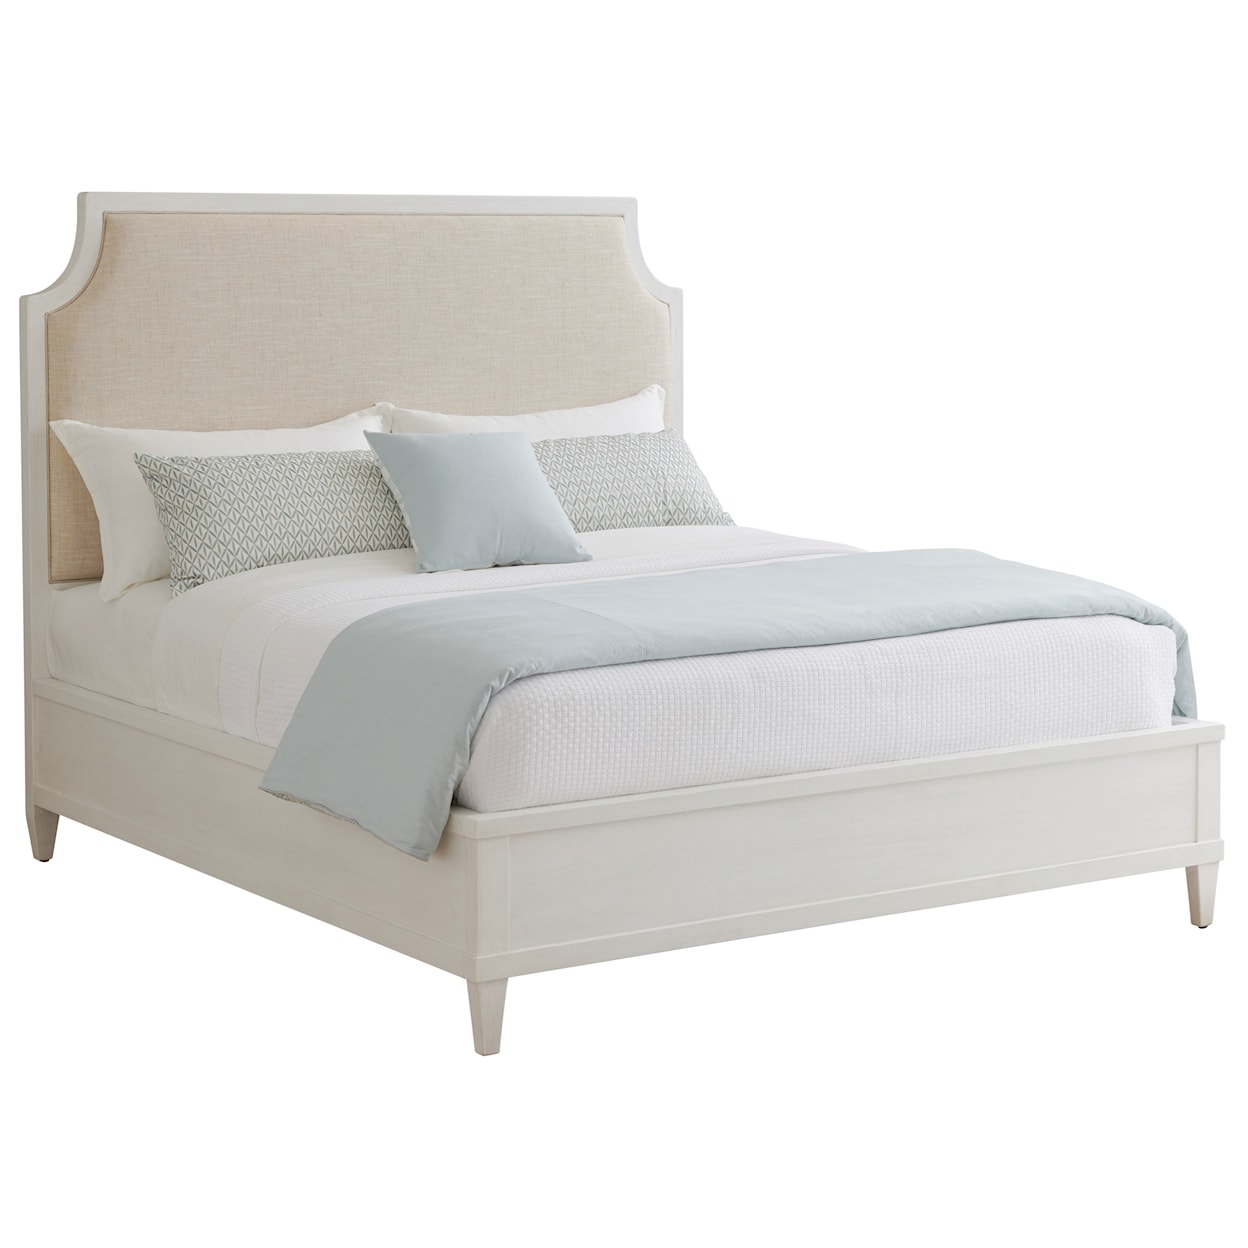 Tommy Bahama Home Ocean Breeze Belle Isle Upholstered Bed King